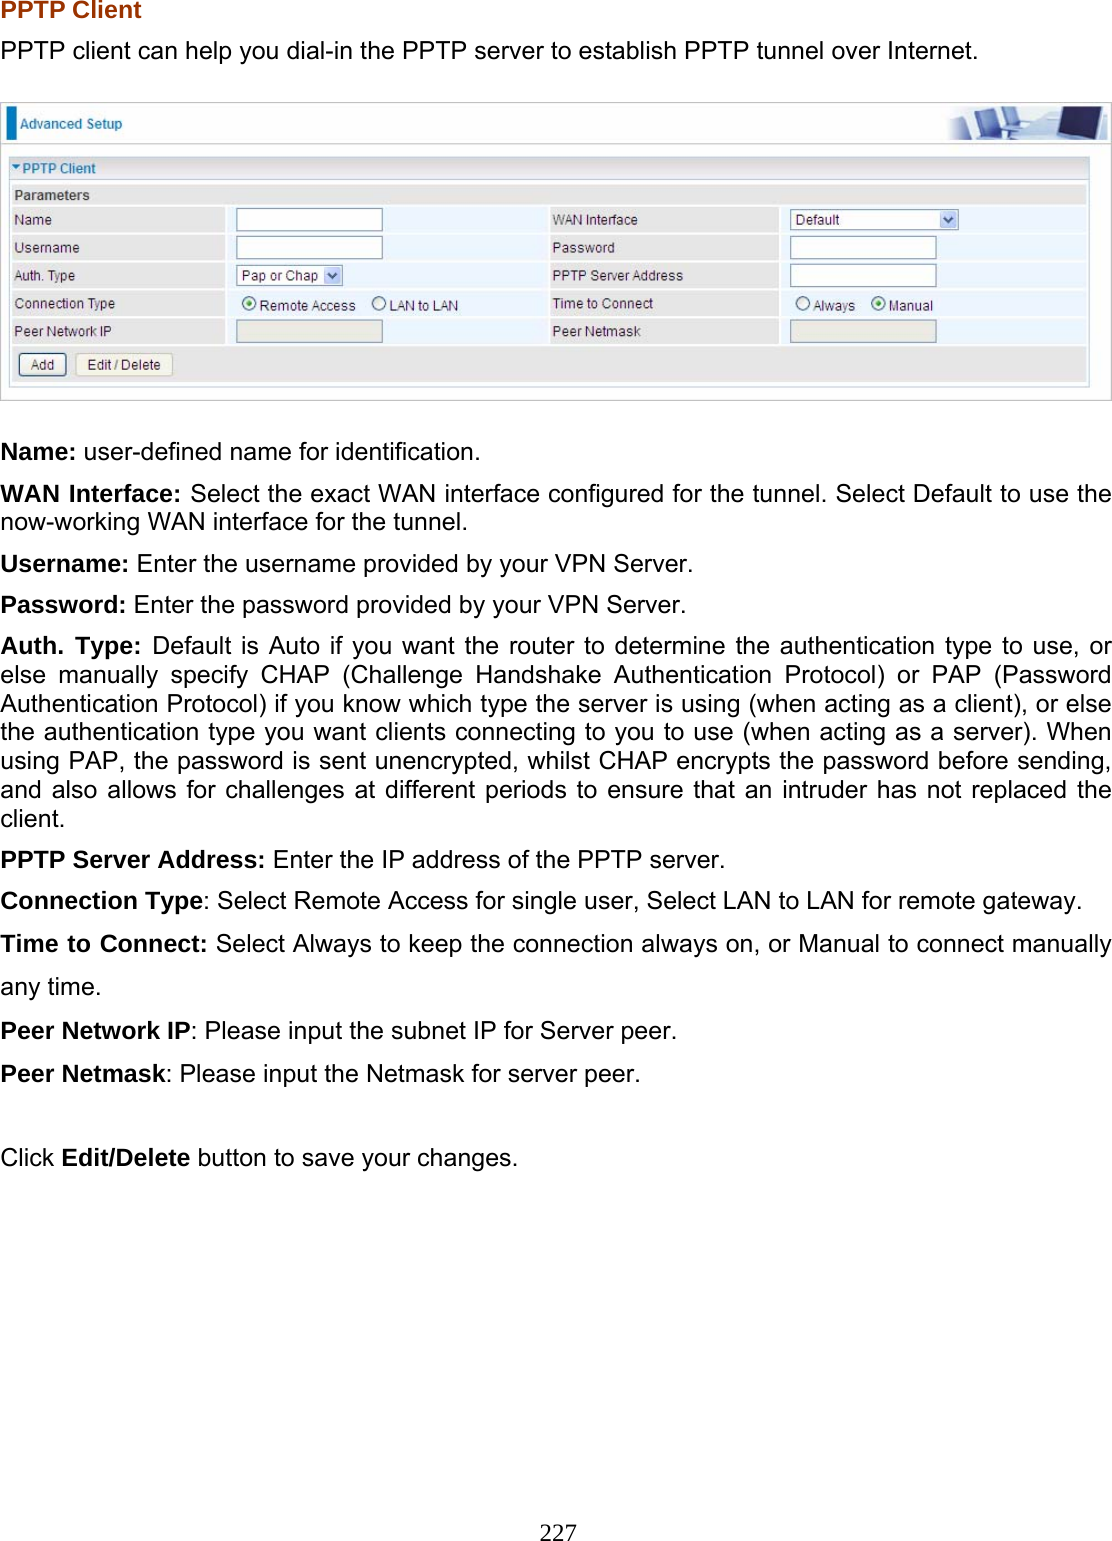 227 PPTP Client PPTP client can help you dial-in the PPTP server to establish PPTP tunnel over Internet.  Name: user-defined name for identification. WAN Interface: Select the exact WAN interface configured for the tunnel. Select Default to use the now-working WAN interface for the tunnel. Username: Enter the username provided by your VPN Server. Password: Enter the password provided by your VPN Server.  Auth. Type: Default is Auto if you want the router to determine the authentication type to use, or else manually specify CHAP (Challenge Handshake Authentication Protocol) or PAP (Password Authentication Protocol) if you know which type the server is using (when acting as a client), or else the authentication type you want clients connecting to you to use (when acting as a server). When using PAP, the password is sent unencrypted, whilst CHAP encrypts the password before sending, and also allows for challenges at different periods to ensure that an intruder has not replaced the client. PPTP Server Address: Enter the IP address of the PPTP server. Connection Type: Select Remote Access for single user, Select LAN to LAN for remote gateway. Time to Connect: Select Always to keep the connection always on, or Manual to connect manually any time. Peer Network IP: Please input the subnet IP for Server peer. Peer Netmask: Please input the Netmask for server peer.  Click Edit/Delete button to save your changes.           